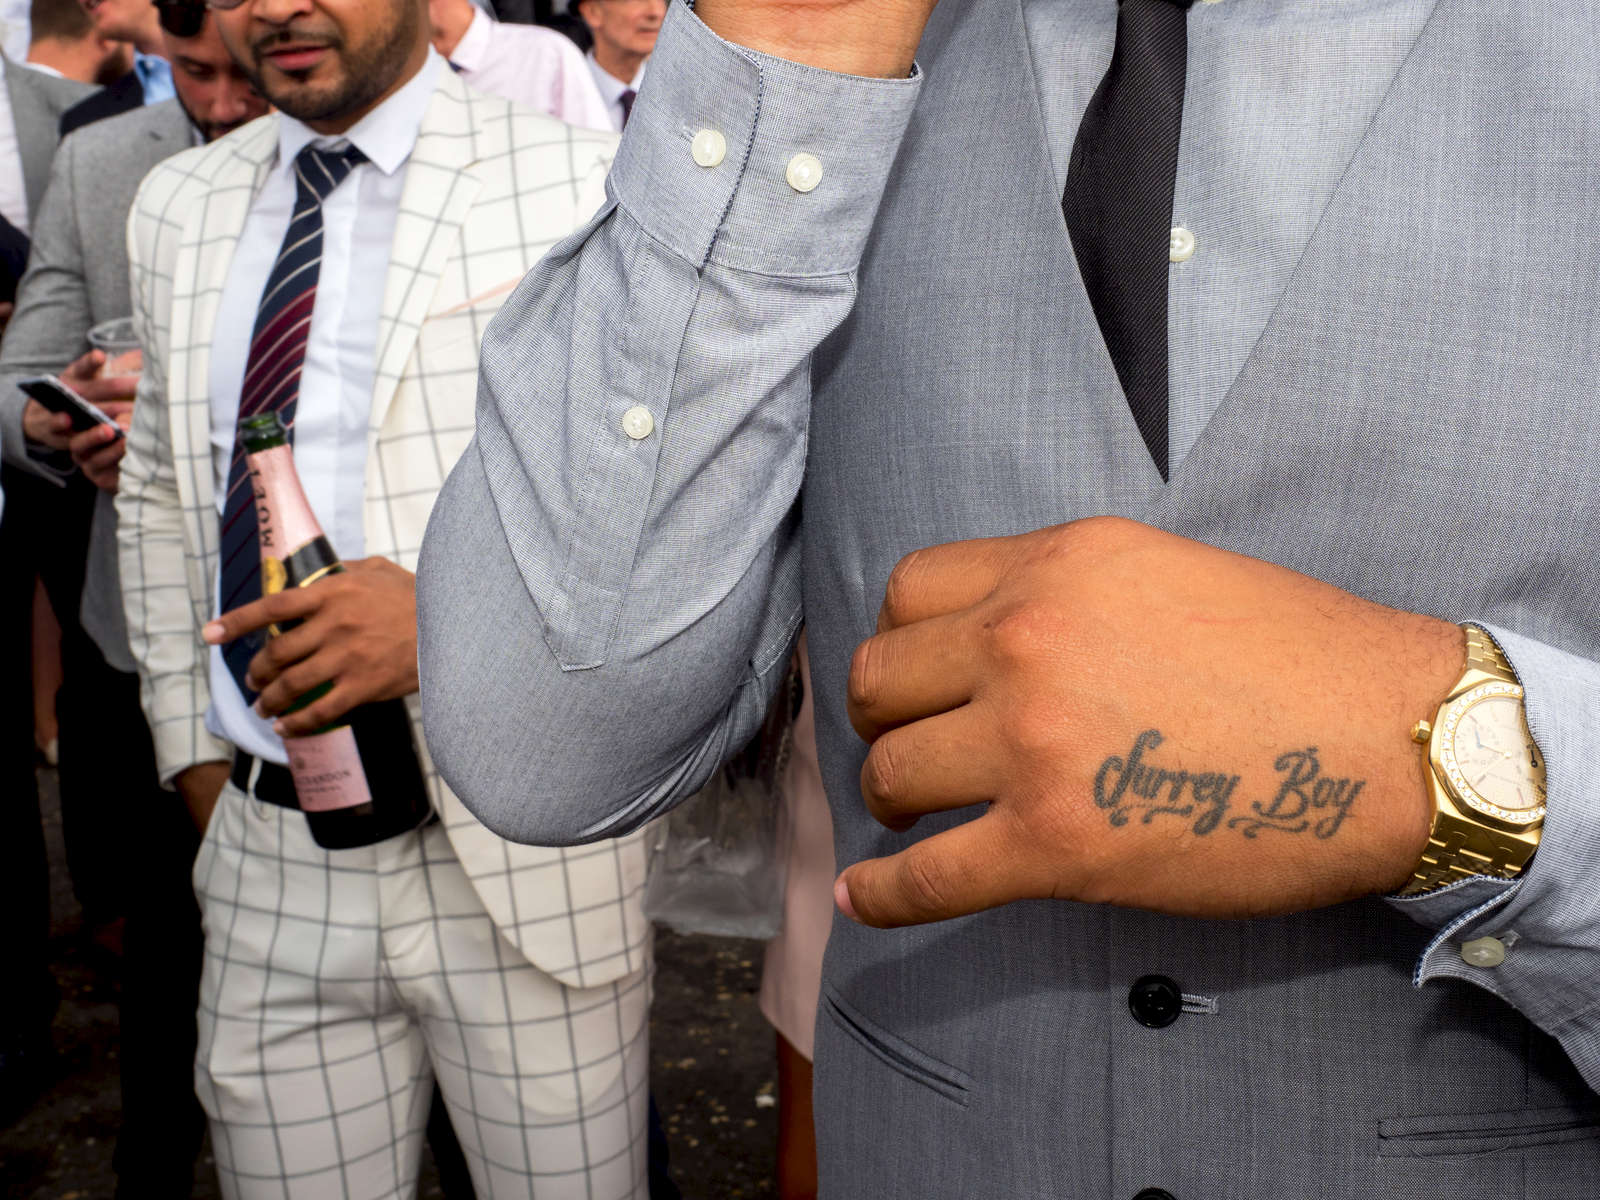 Surrey Boy; a tattoo of allegianc to the county by one male visitor to Epsom.Ladies' Day is traditionally held on the first Friday of June, a multitude of ladies and gents head to Epsom Downs Racecourse to experience a day full of high octane racing, music, glamour and fashion.